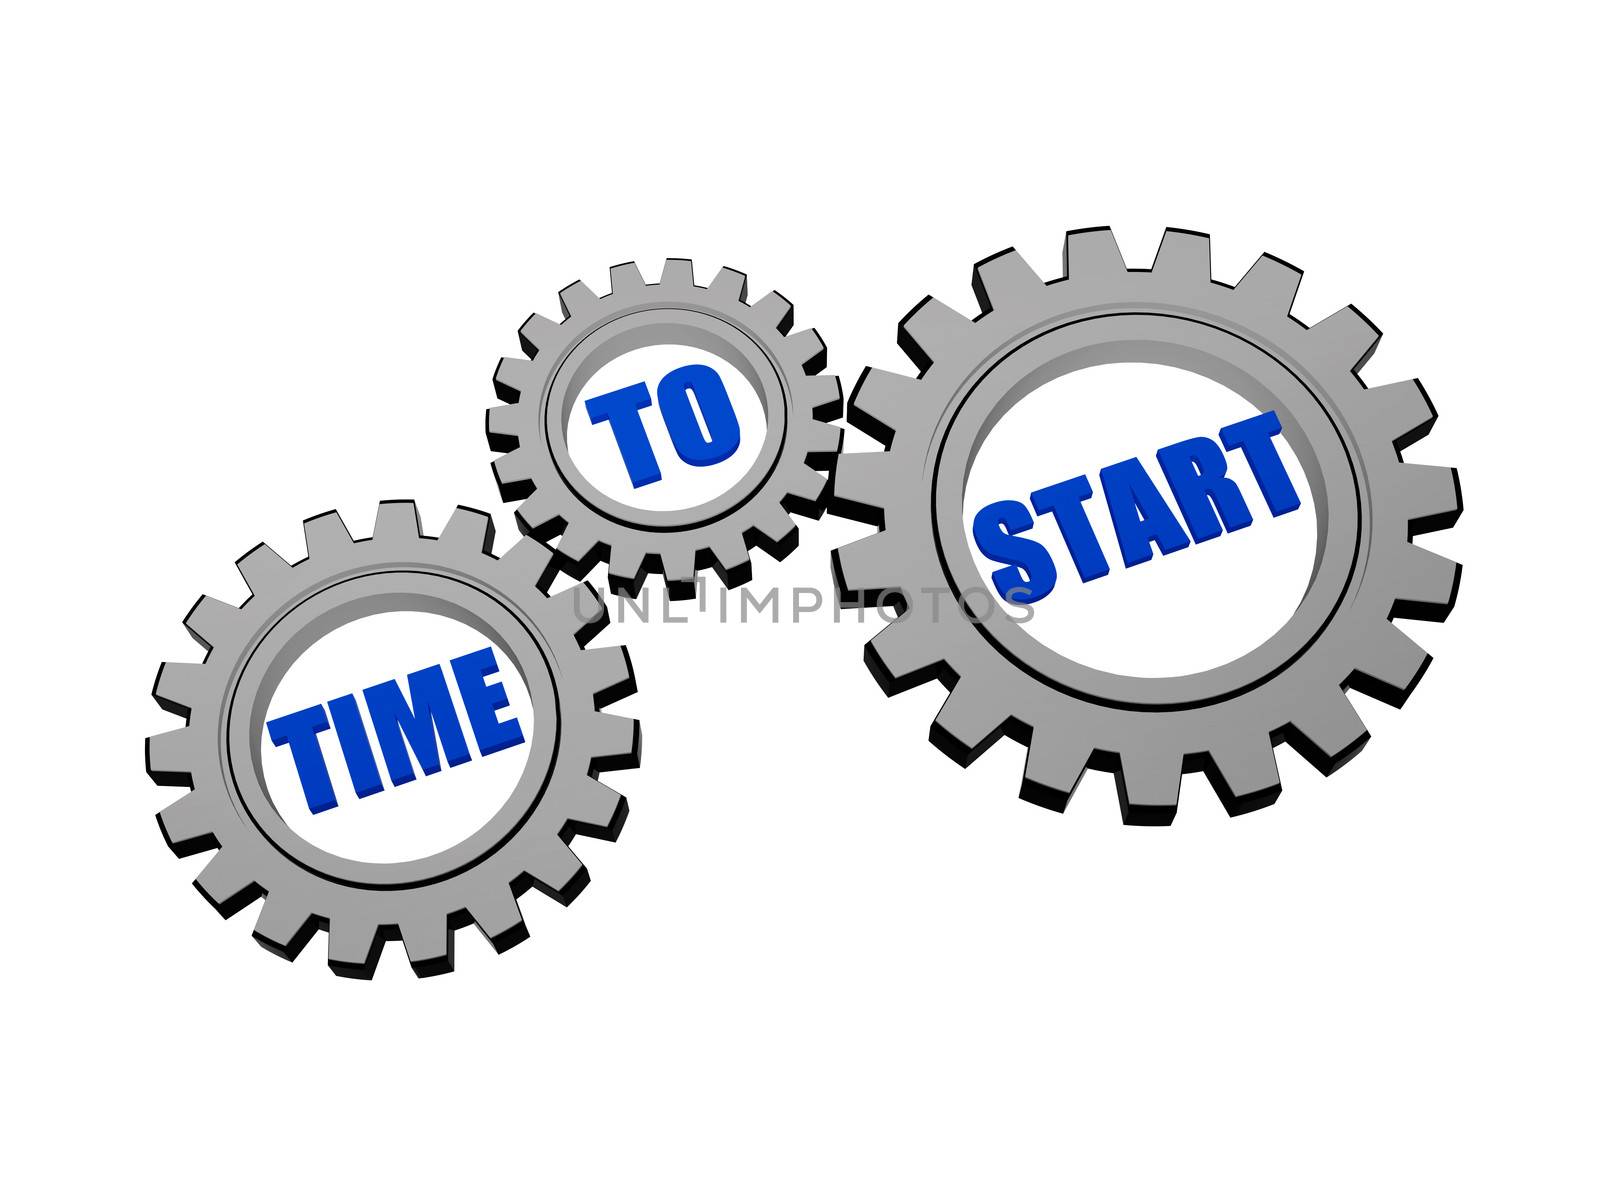 time to start - words in 3d silver grey metal gear wheels, business motivation concept